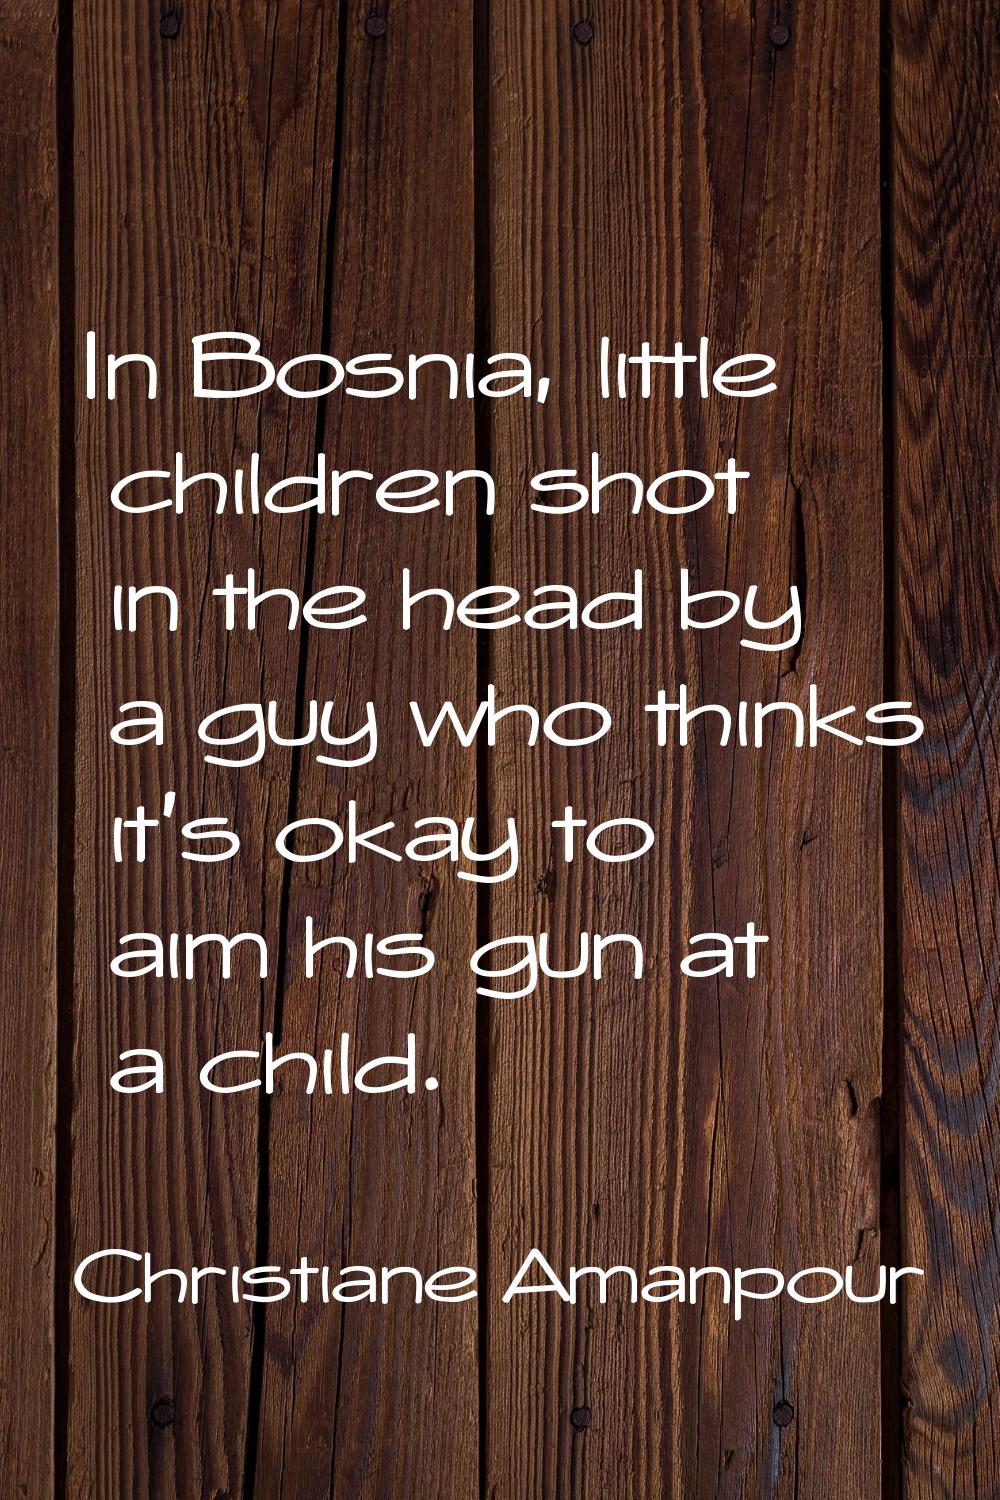 In Bosnia, little children shot in the head by a guy who thinks it's okay to aim his gun at a child